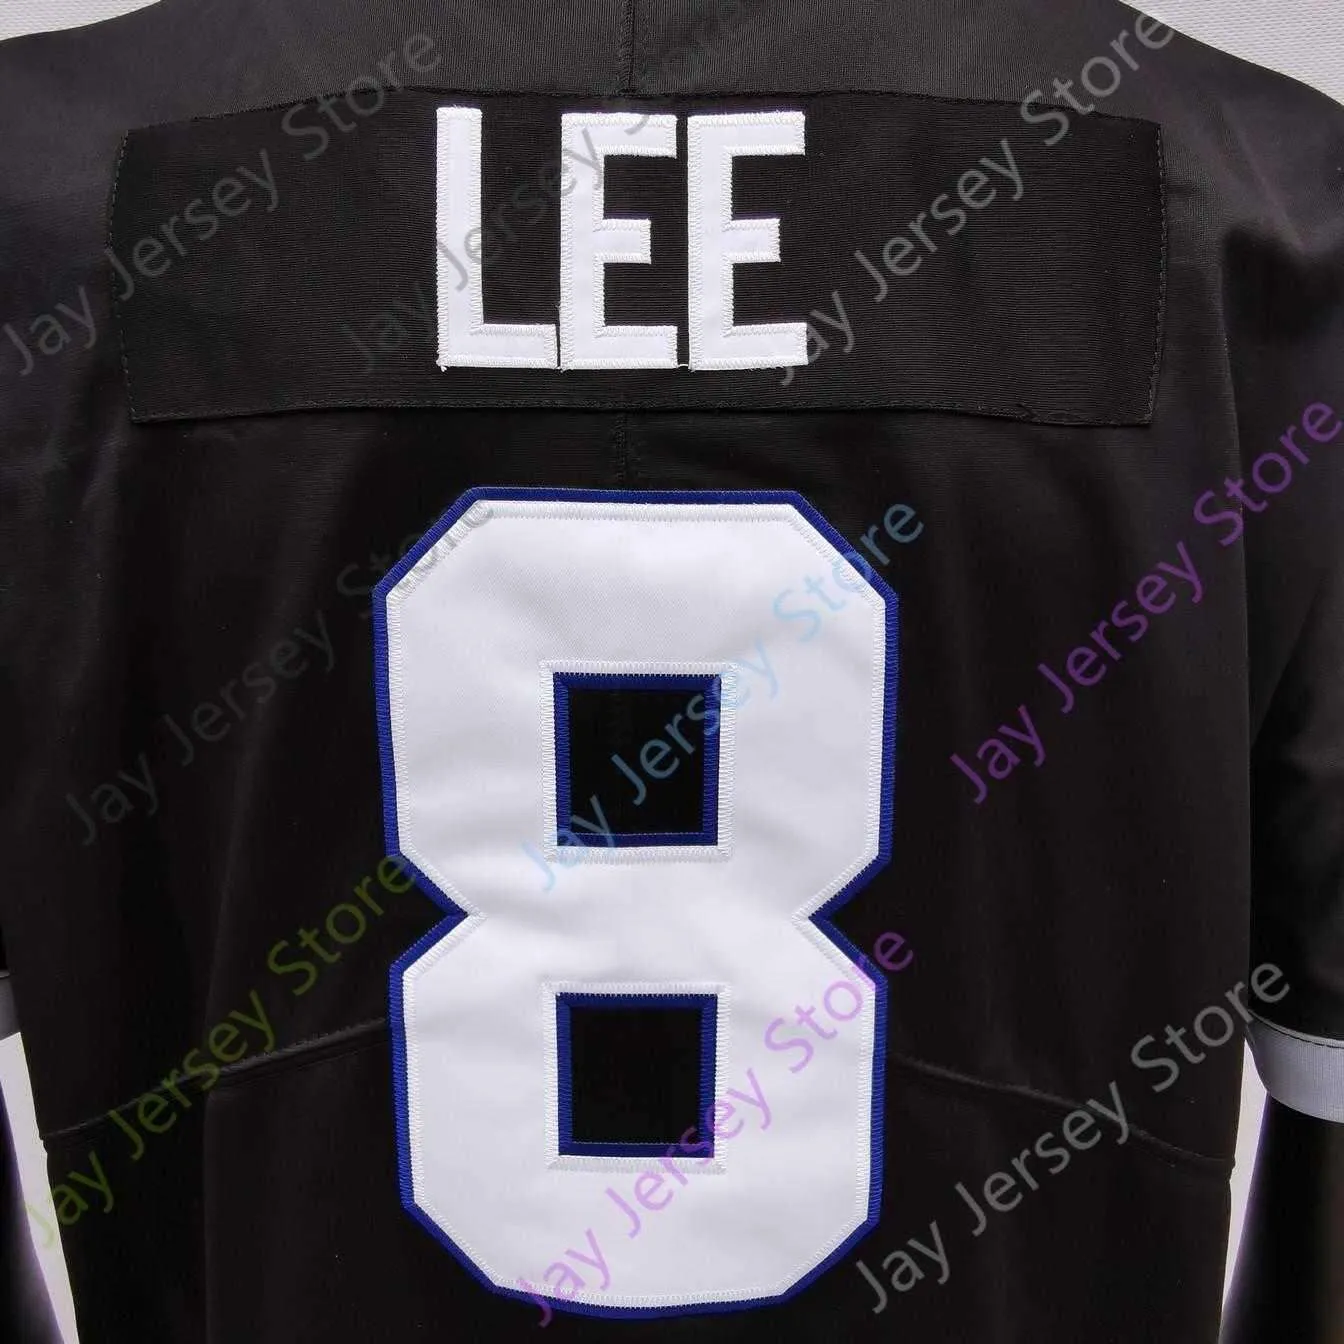 2020 New NCAA Middle Tennessee State Jerseys 8  Lee College Football Jersey Black Size Youth Adult All Stitched